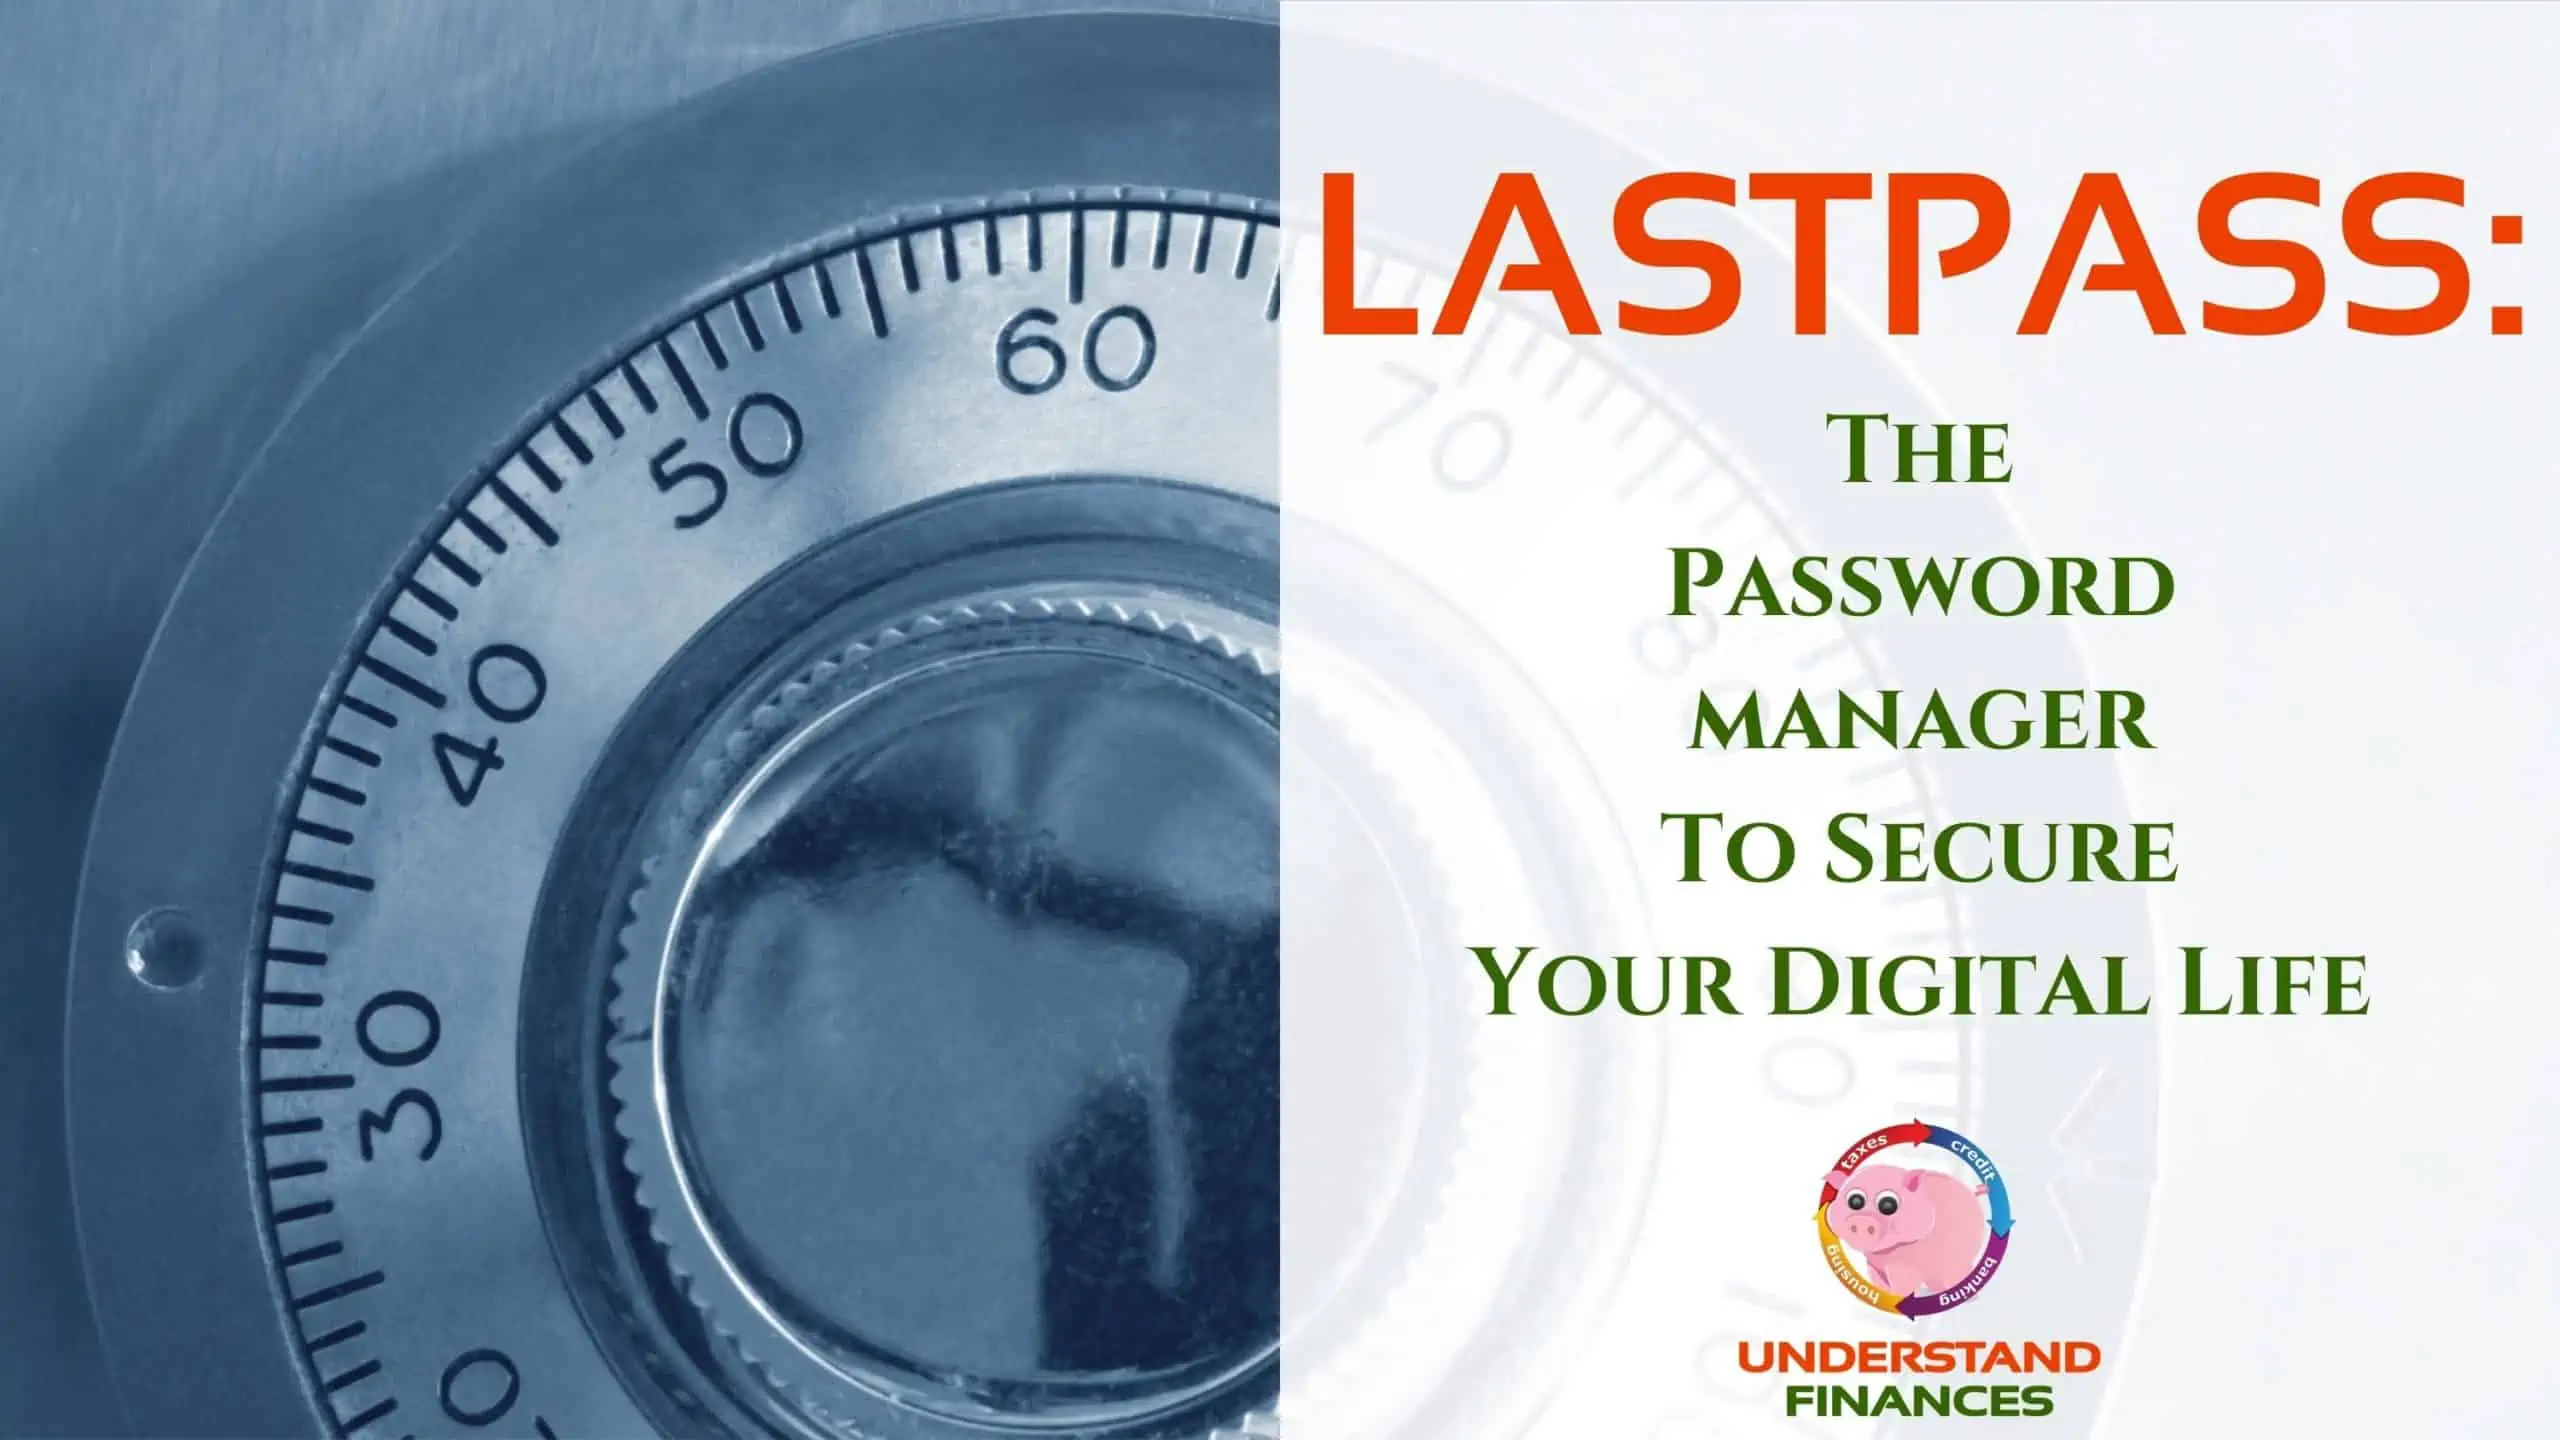 LastPass: The Password Manager To Secure Your Digital Life